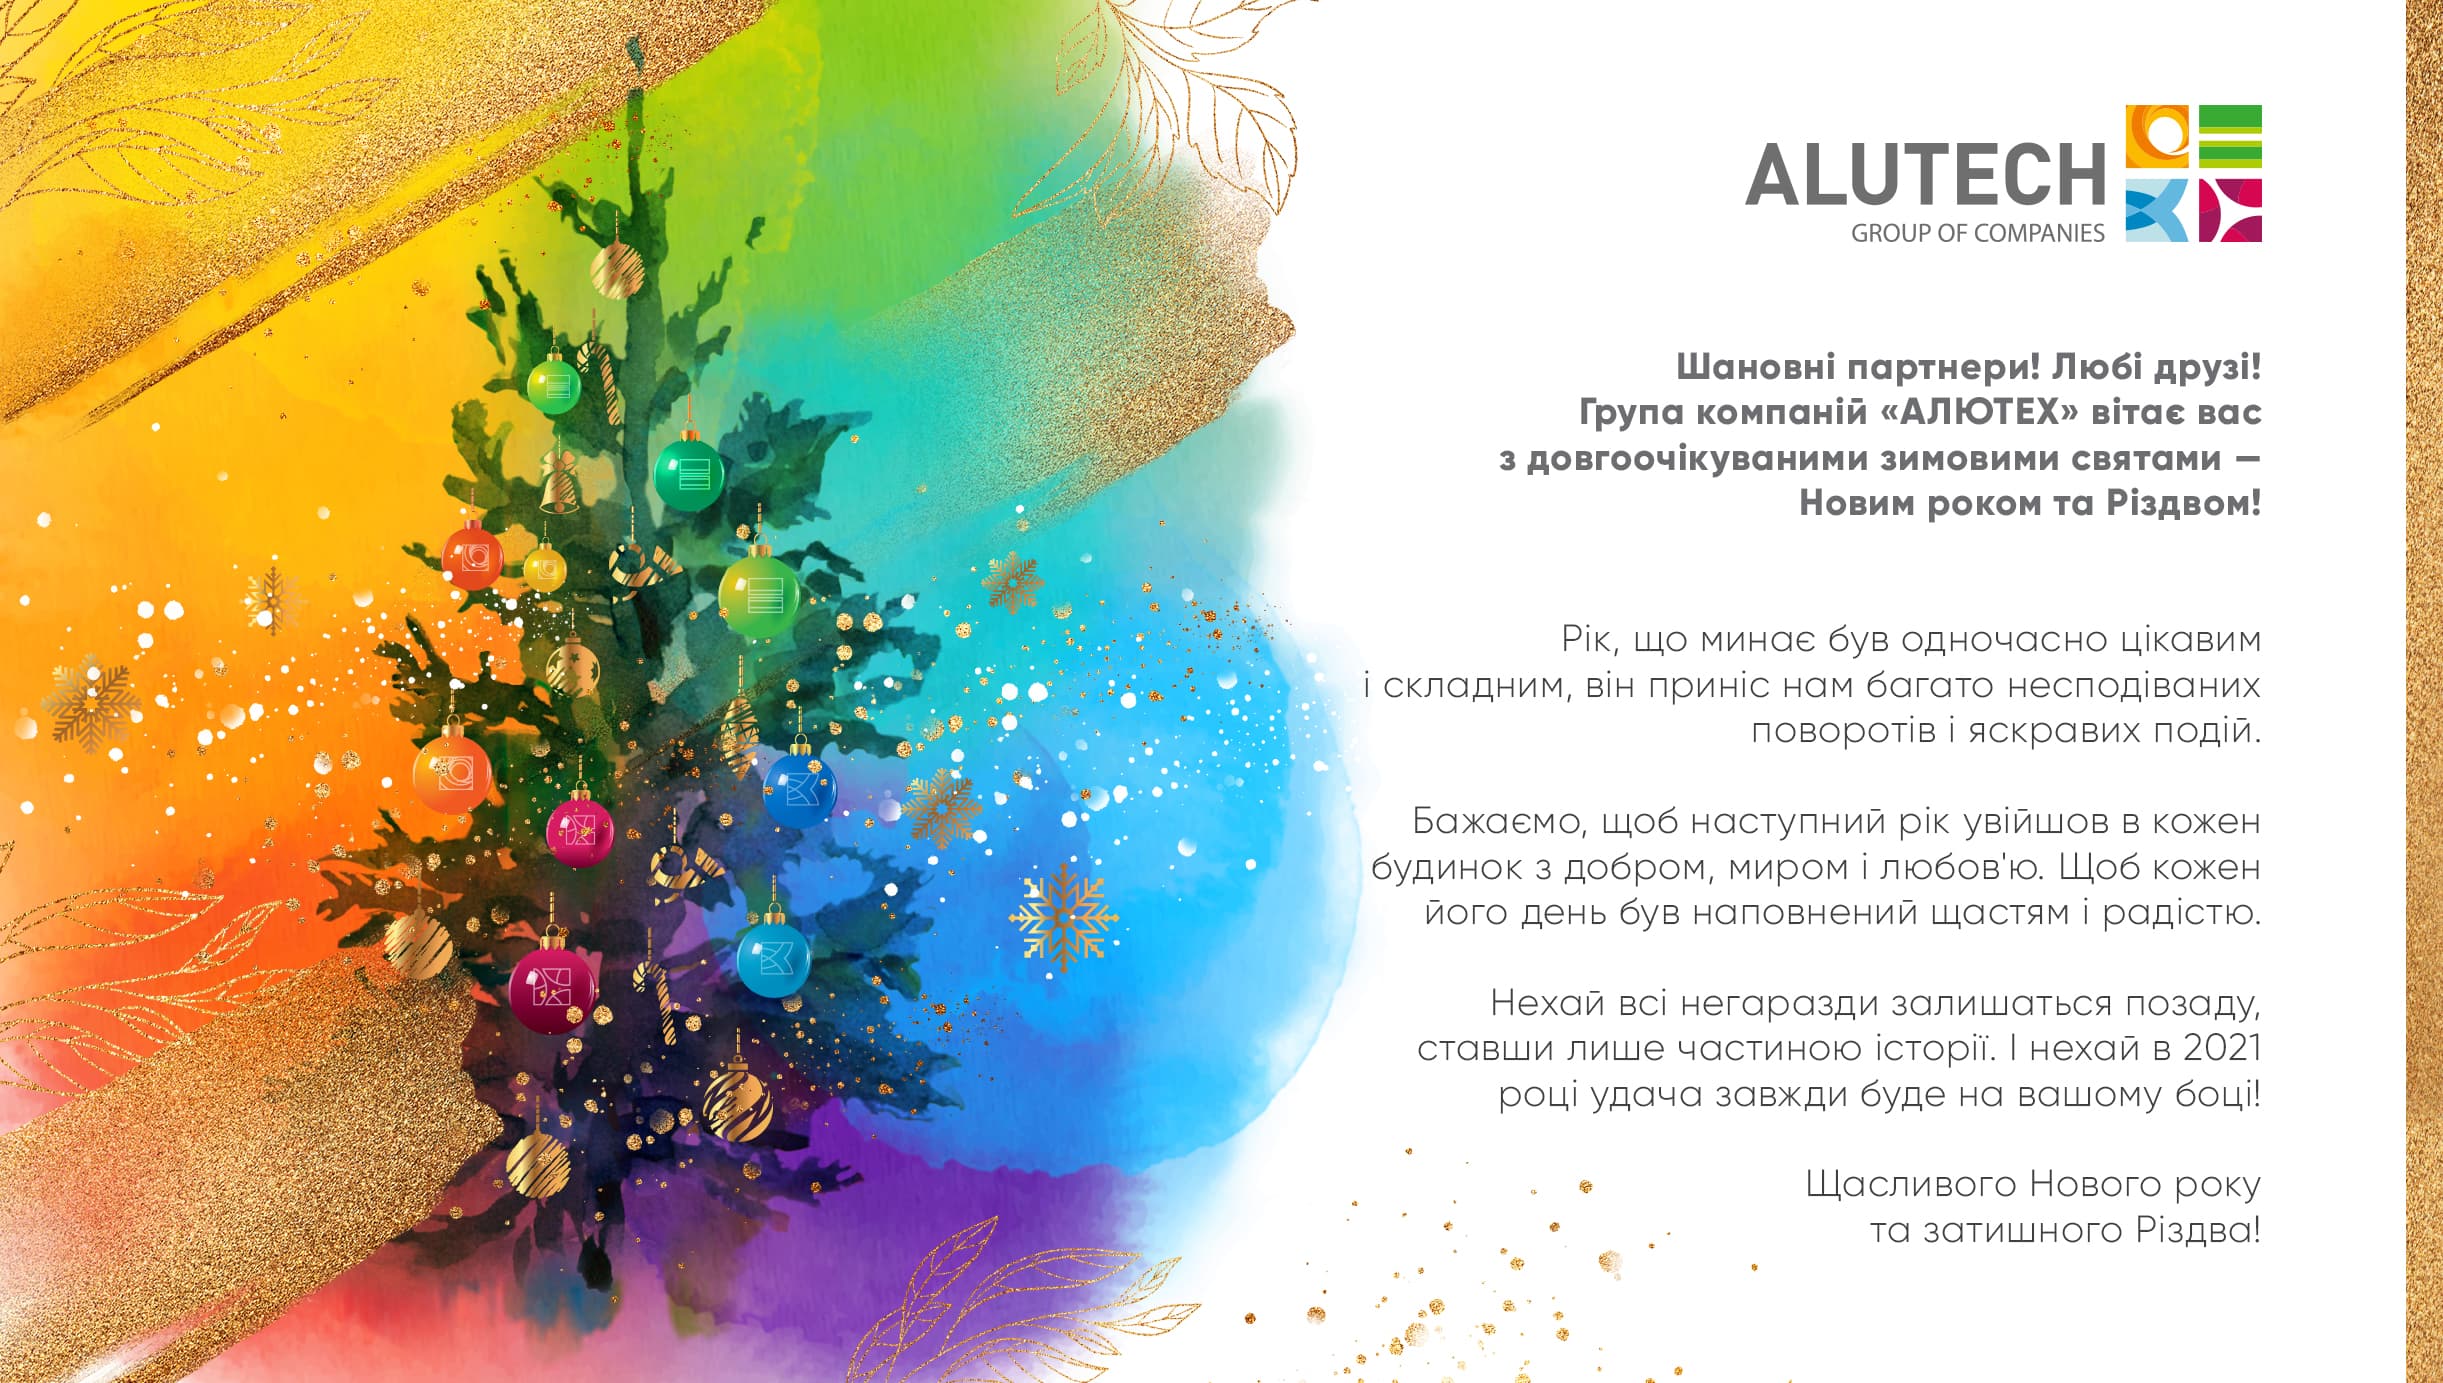 The ALUTECH Group of companies congratulates you on the long-awaited winter holidays - Christmas and New Year!